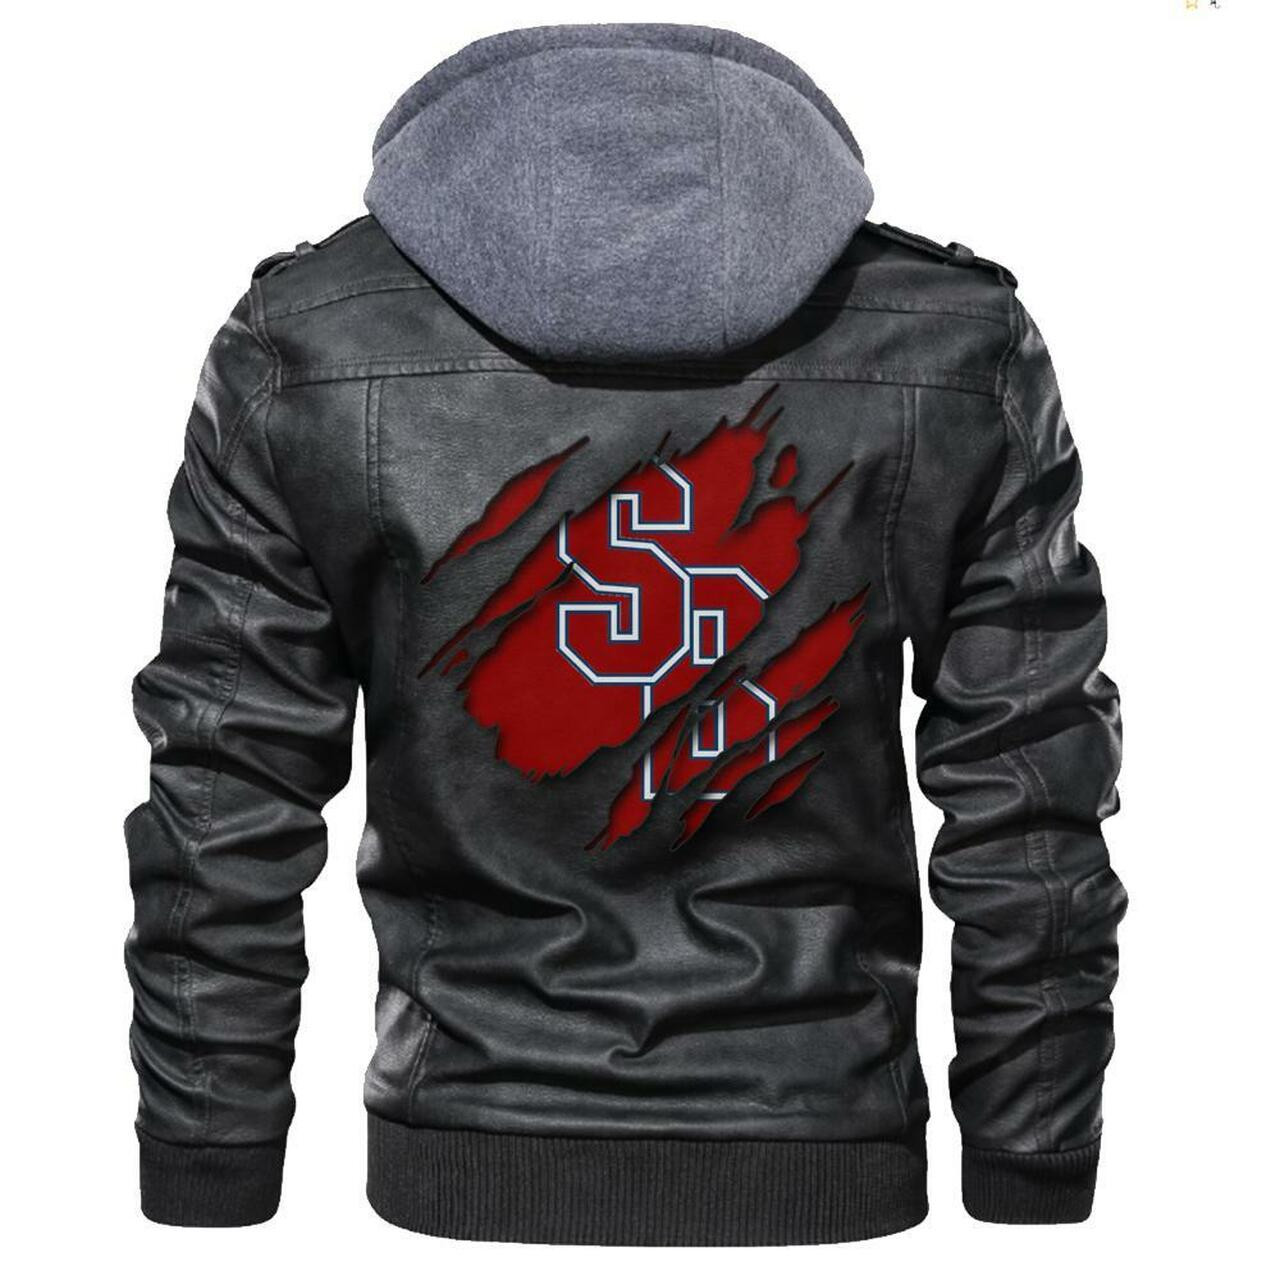 You'll get the best Leather Jacket by shopping online 197